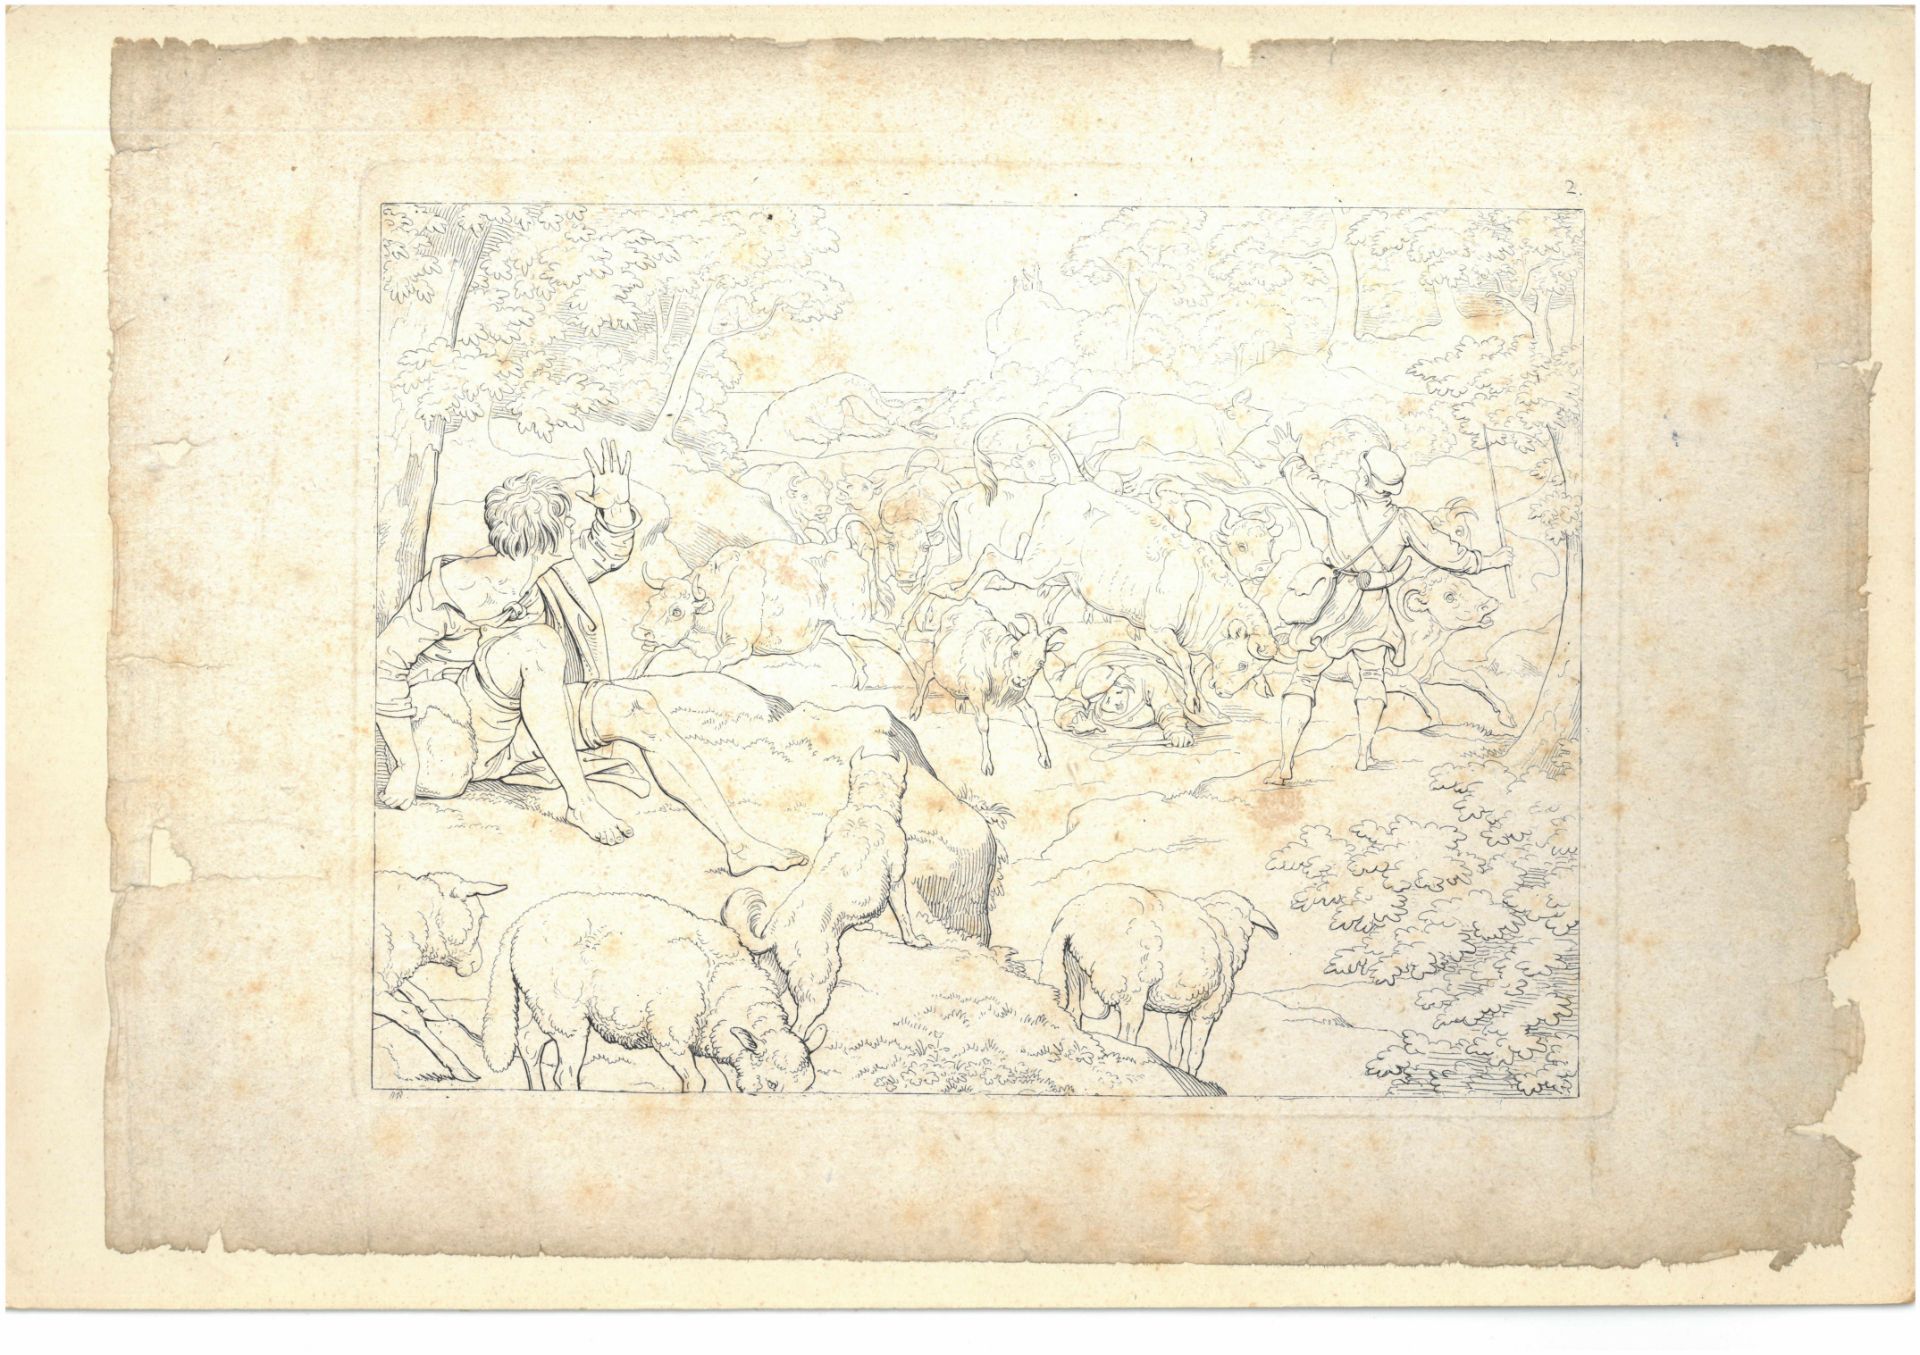 A portfolio of black and white illustration plates depicting the story of "Bolla" (possibly)  the - Image 4 of 18